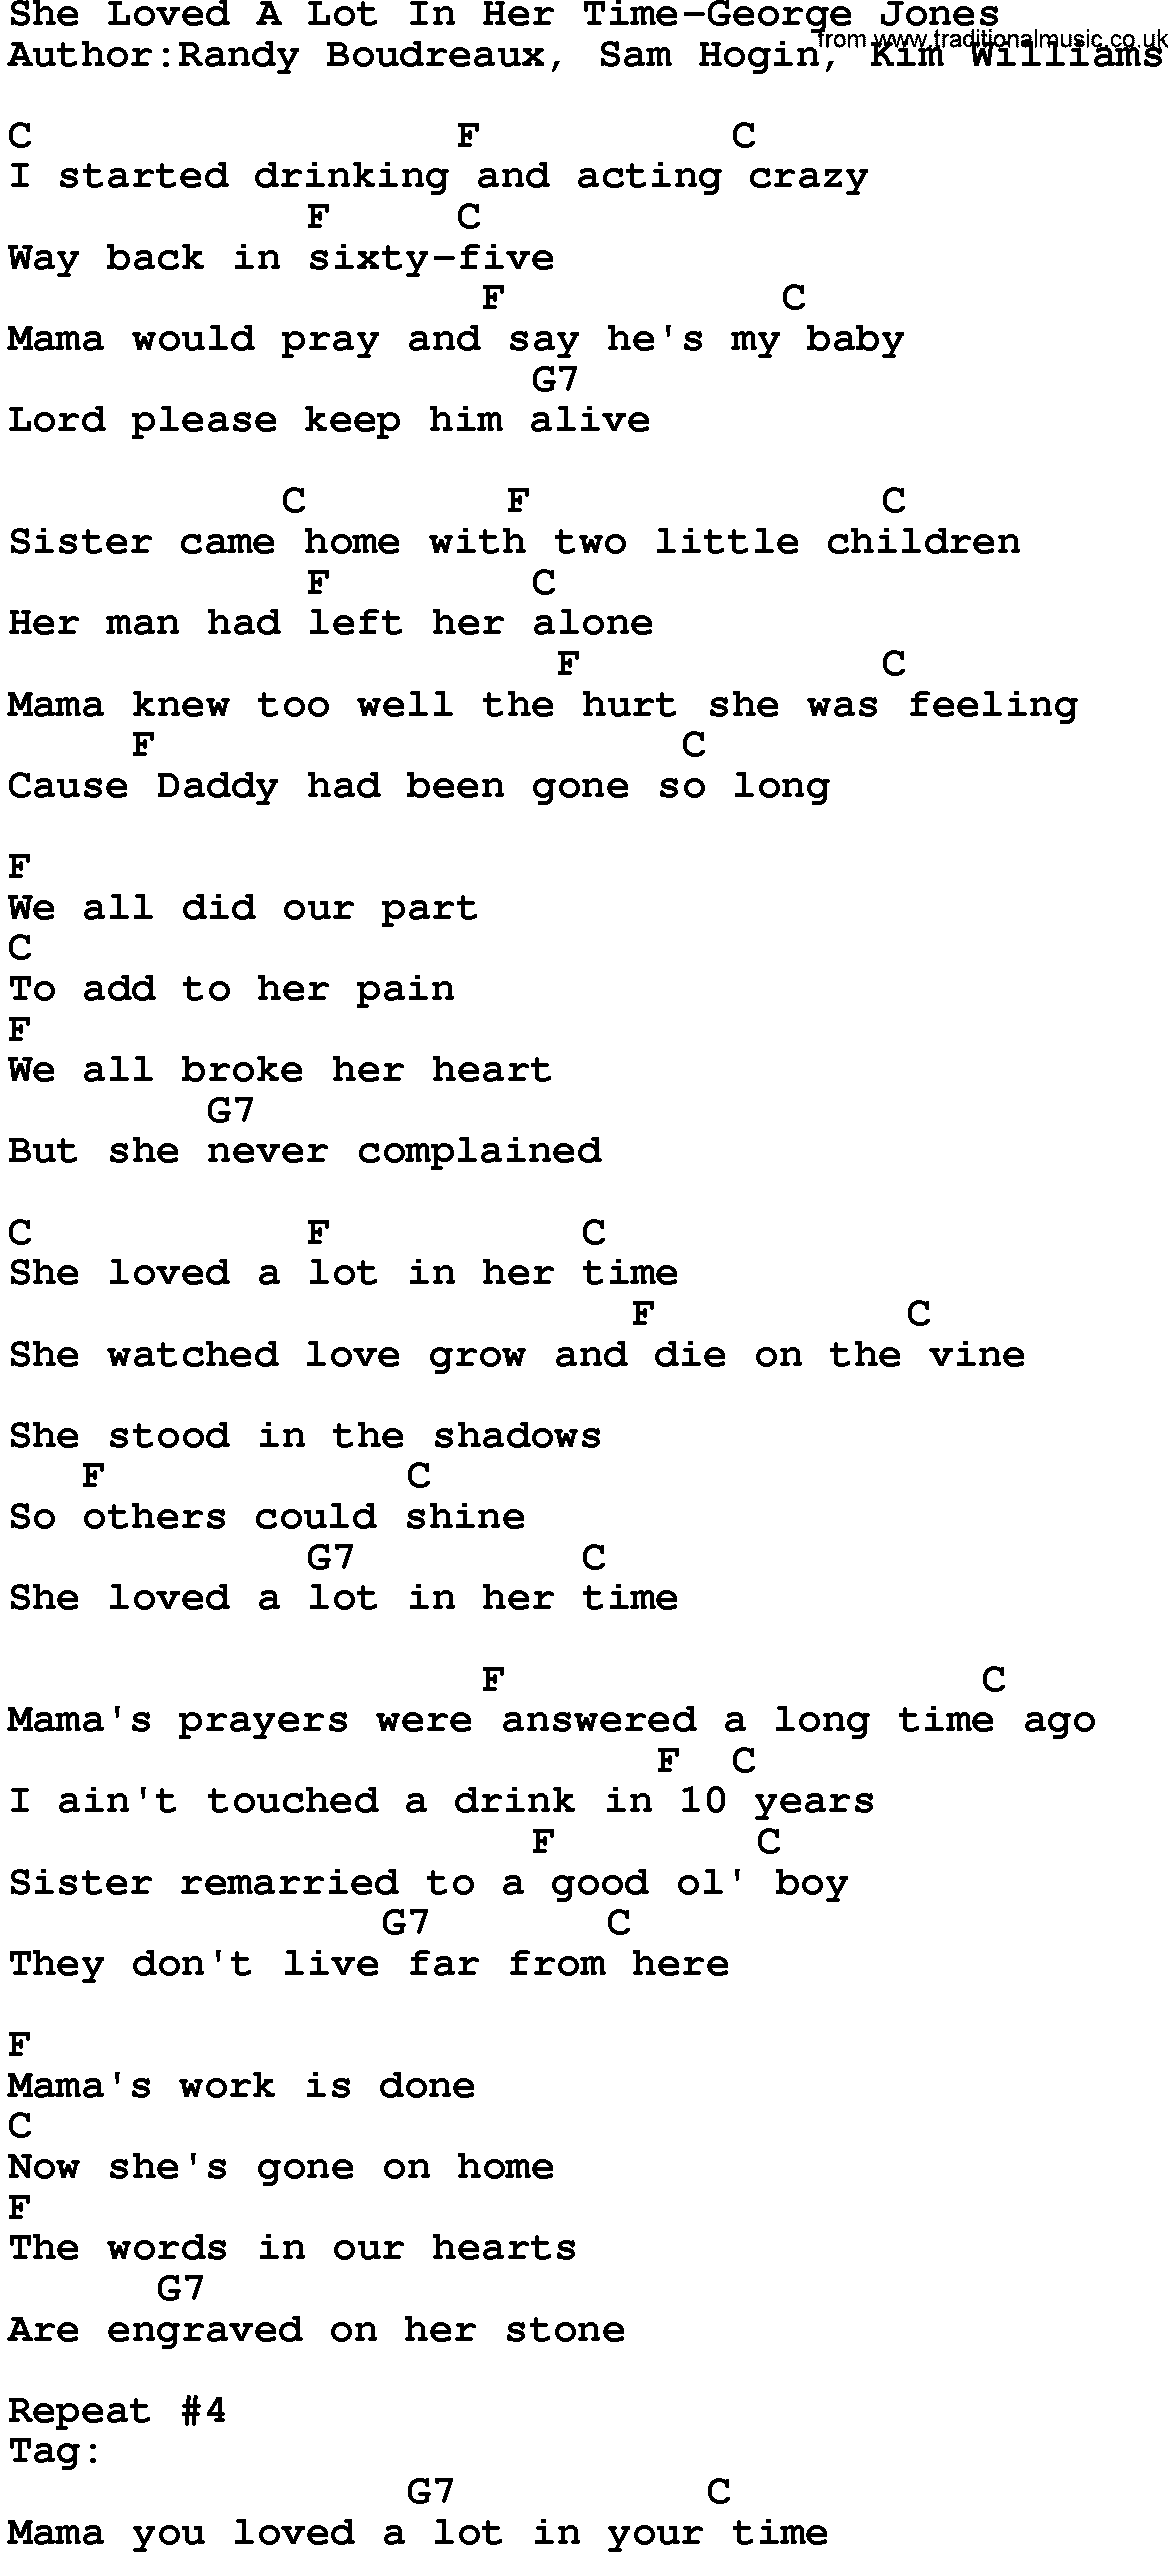 Country music song: She Loved A Lot In Her Time-George Jones lyrics and chords